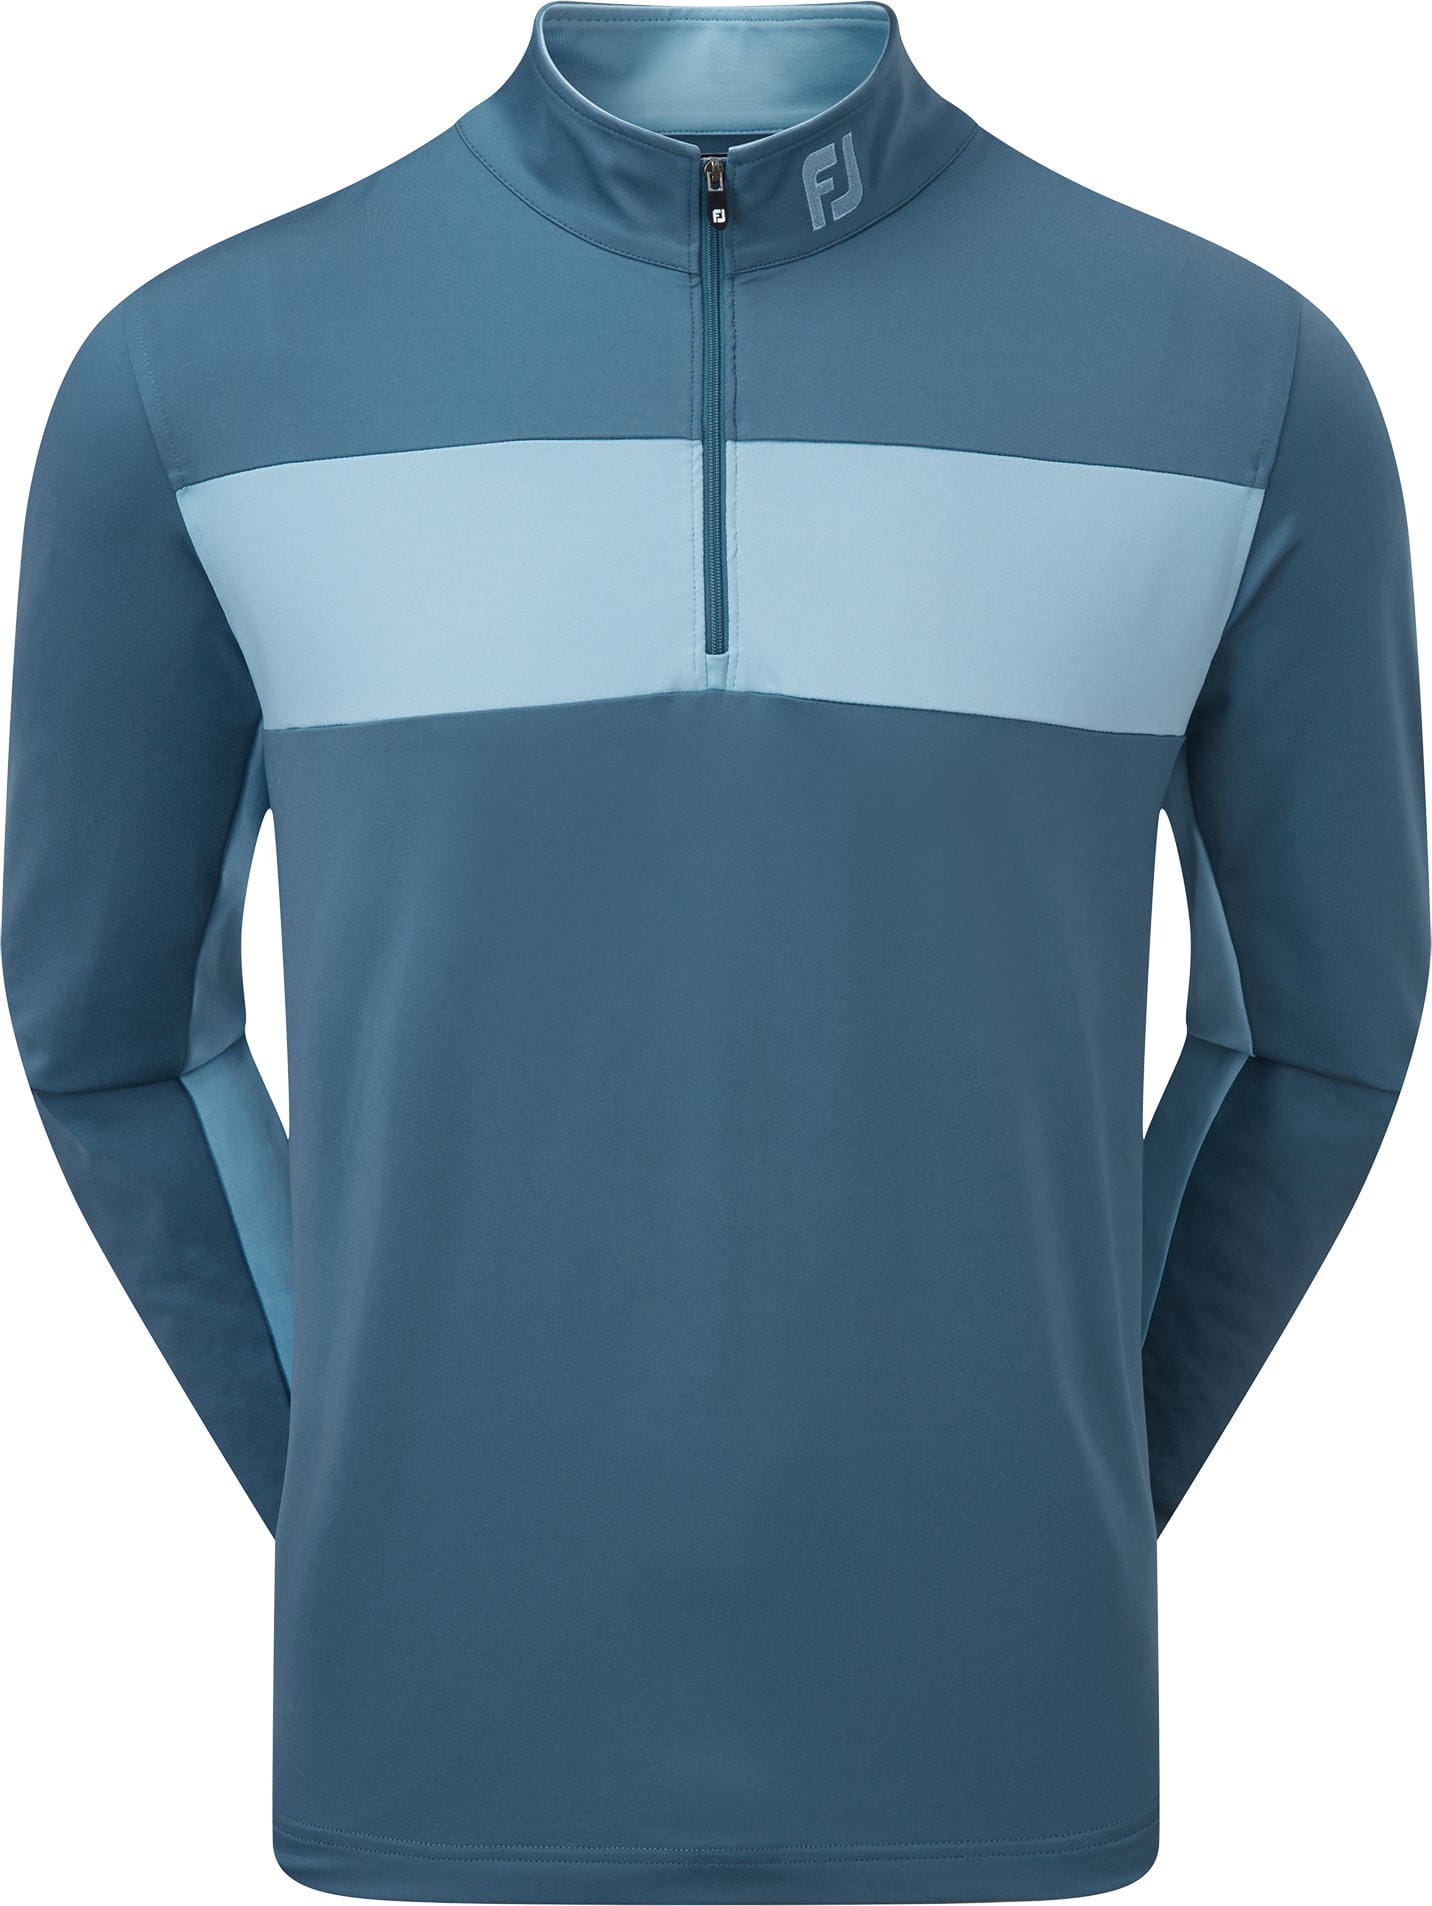 FootJoy Engineered Chest Stripe Chill-Out Midlayer, ink/blue